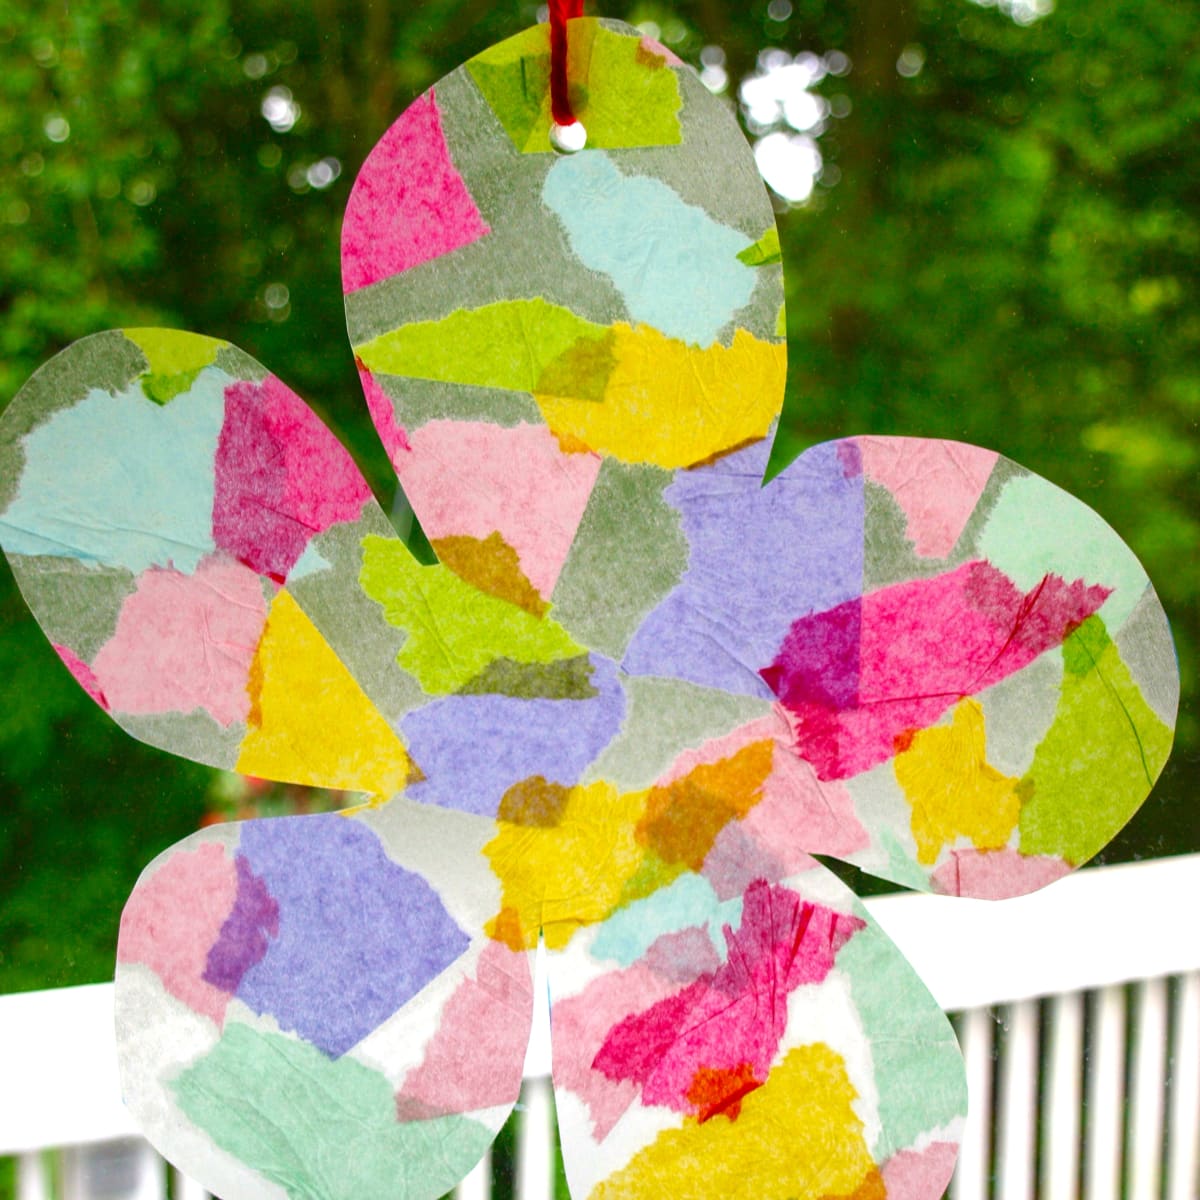 25 Cheerful Sun Crafts for Toddlers  Sun crafts, Sunshine crafts, Toddler  crafts